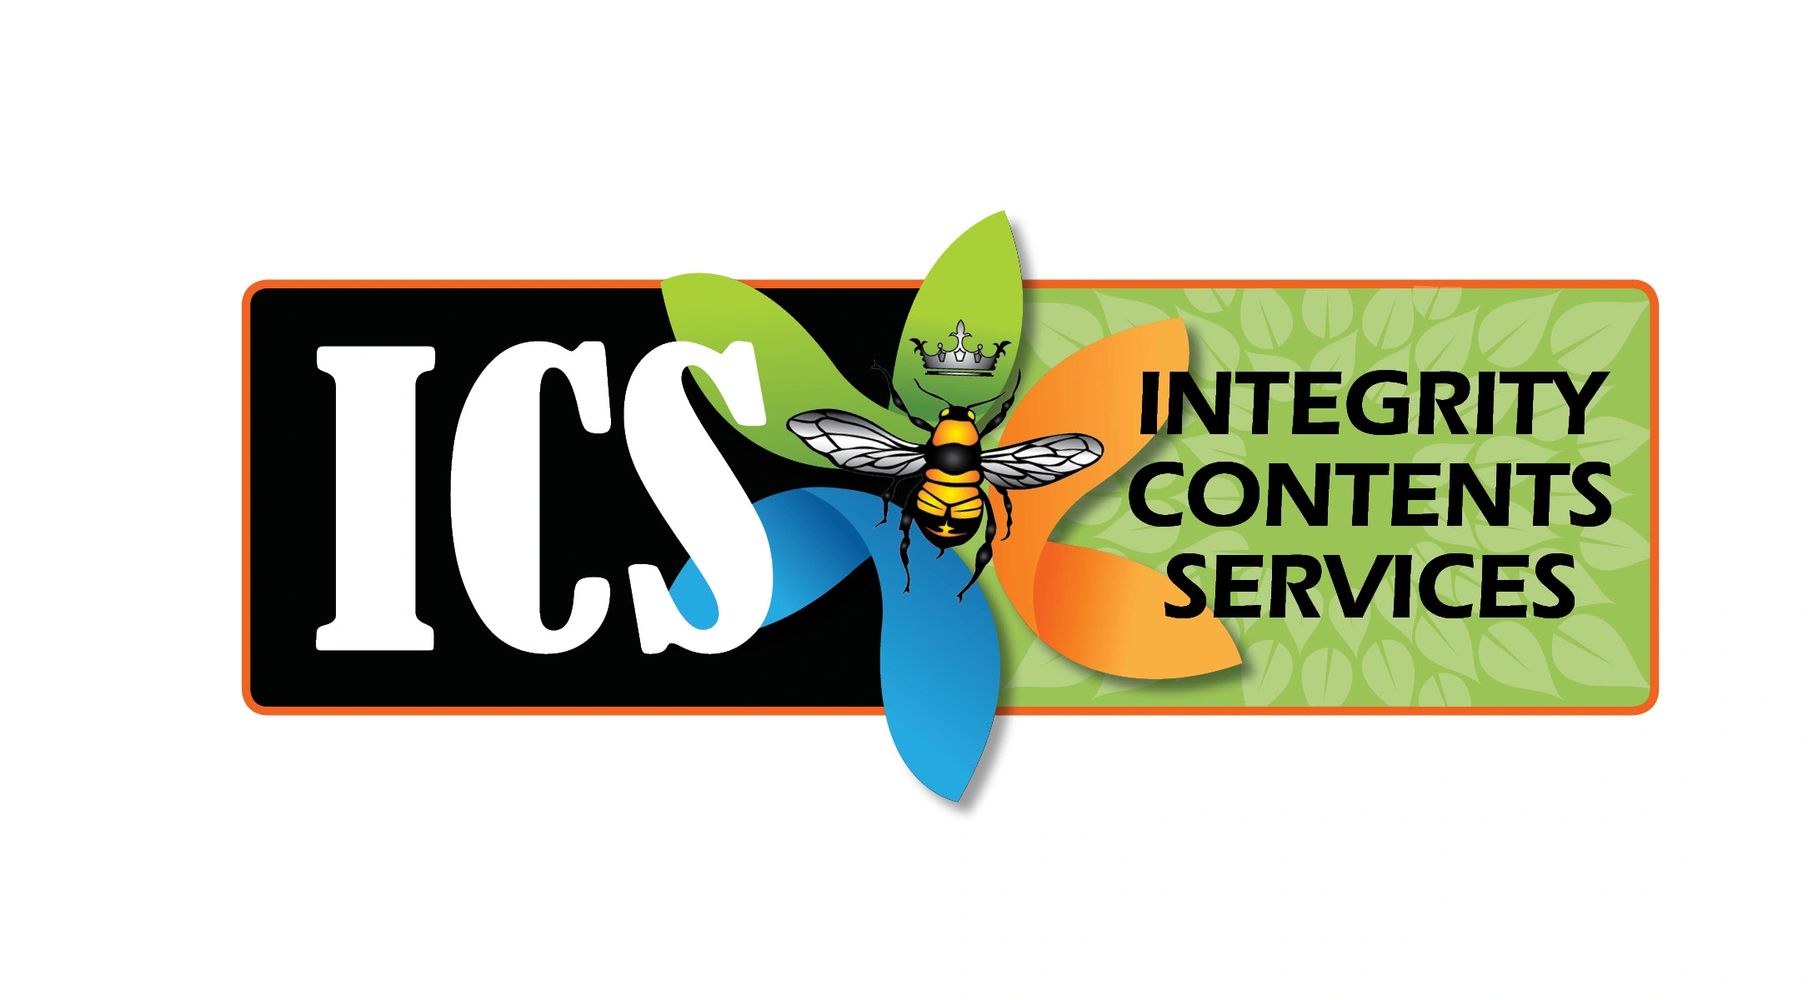 Integrity Contents Services